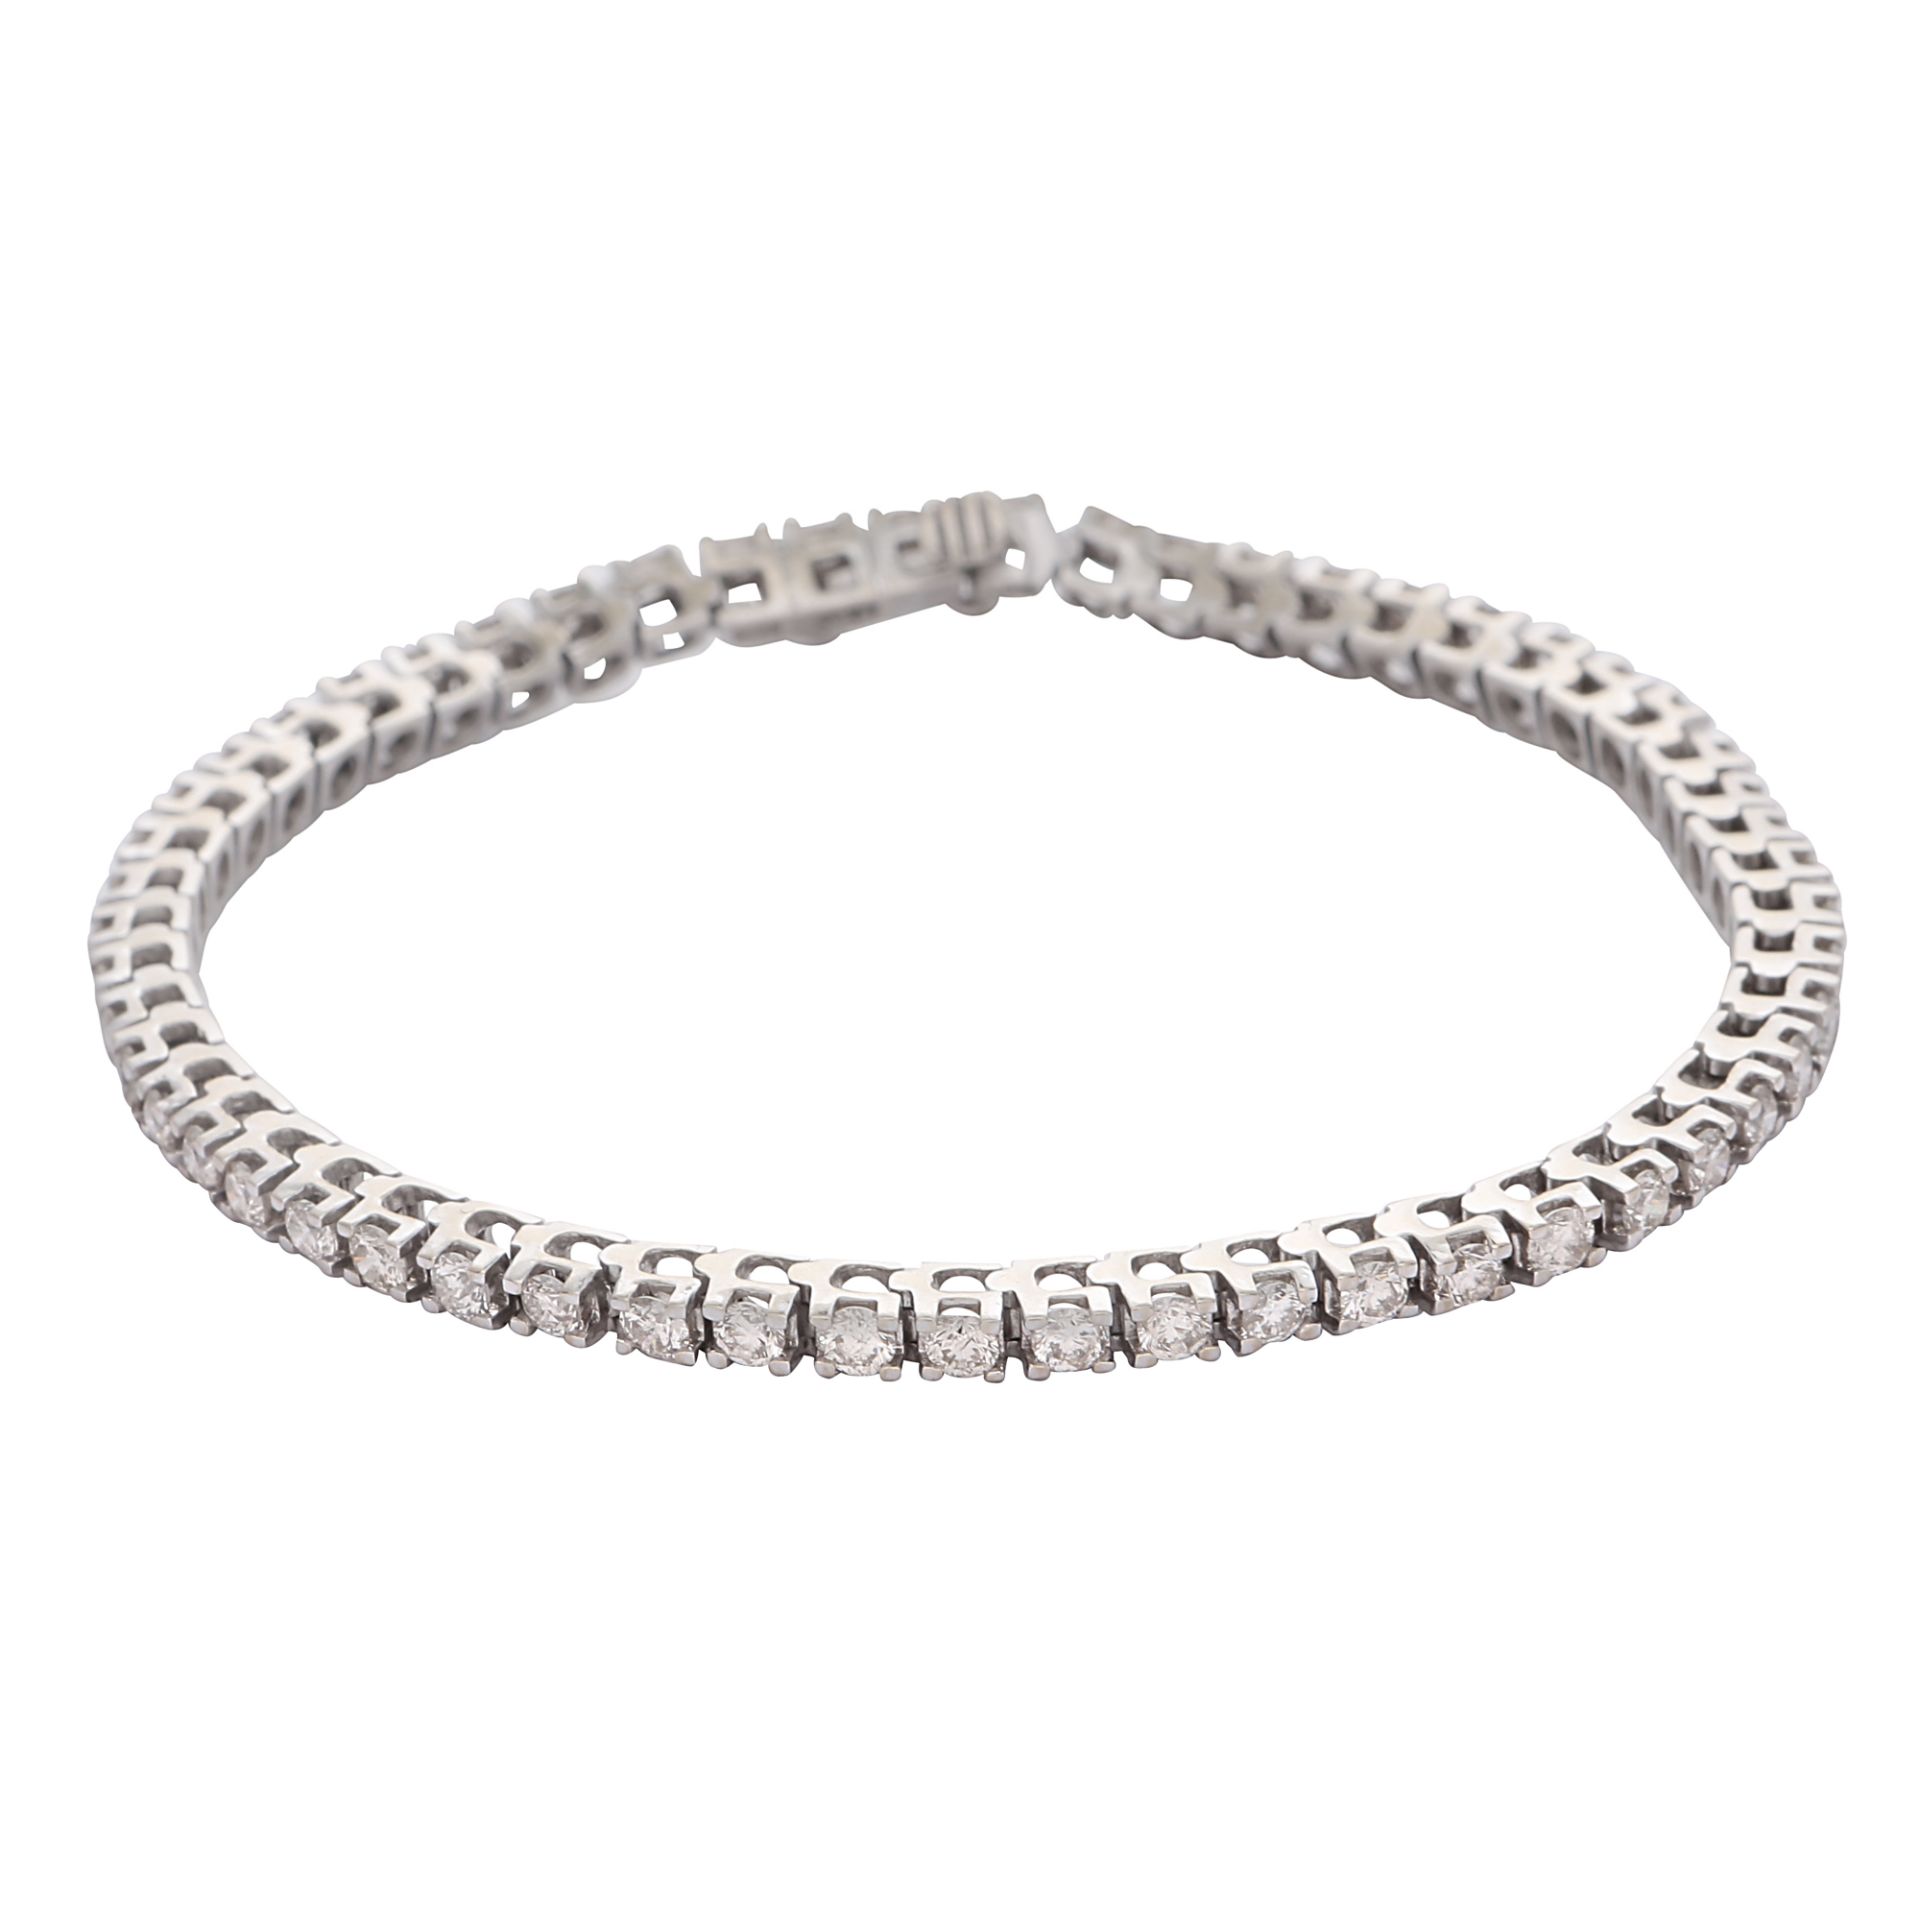 A diamond line / tennis bracelet in 18ct white gold, set with fifty five round brilliant cut